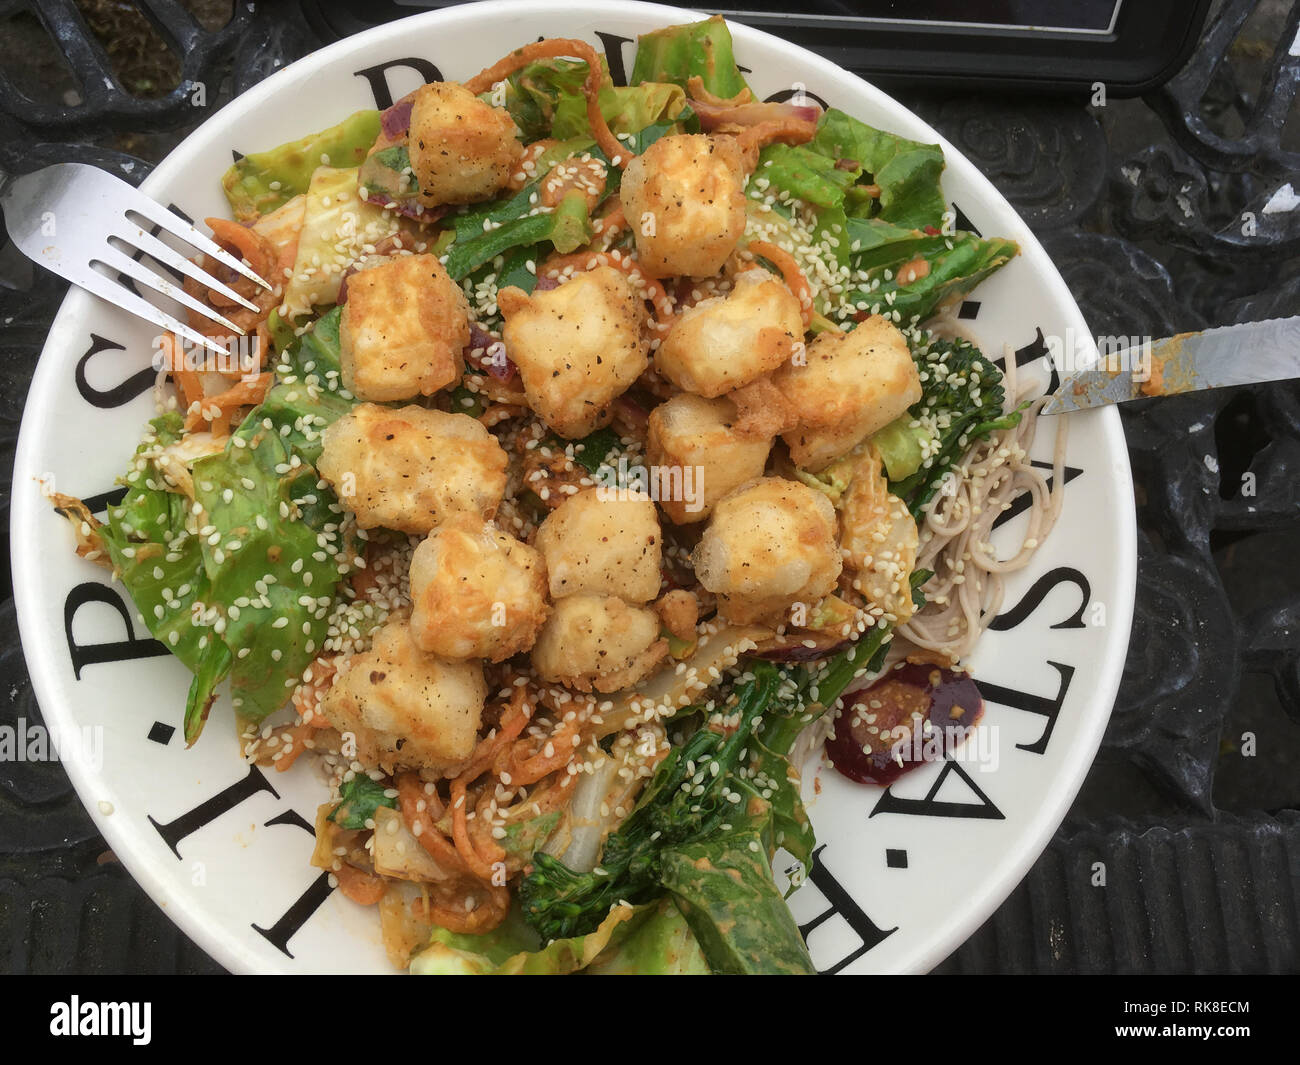 Vegan meal for dinner.  Homemade crispy tofu chunks deep fried on a plate of greens and noodles covered with sesame seeds. Stock Photo